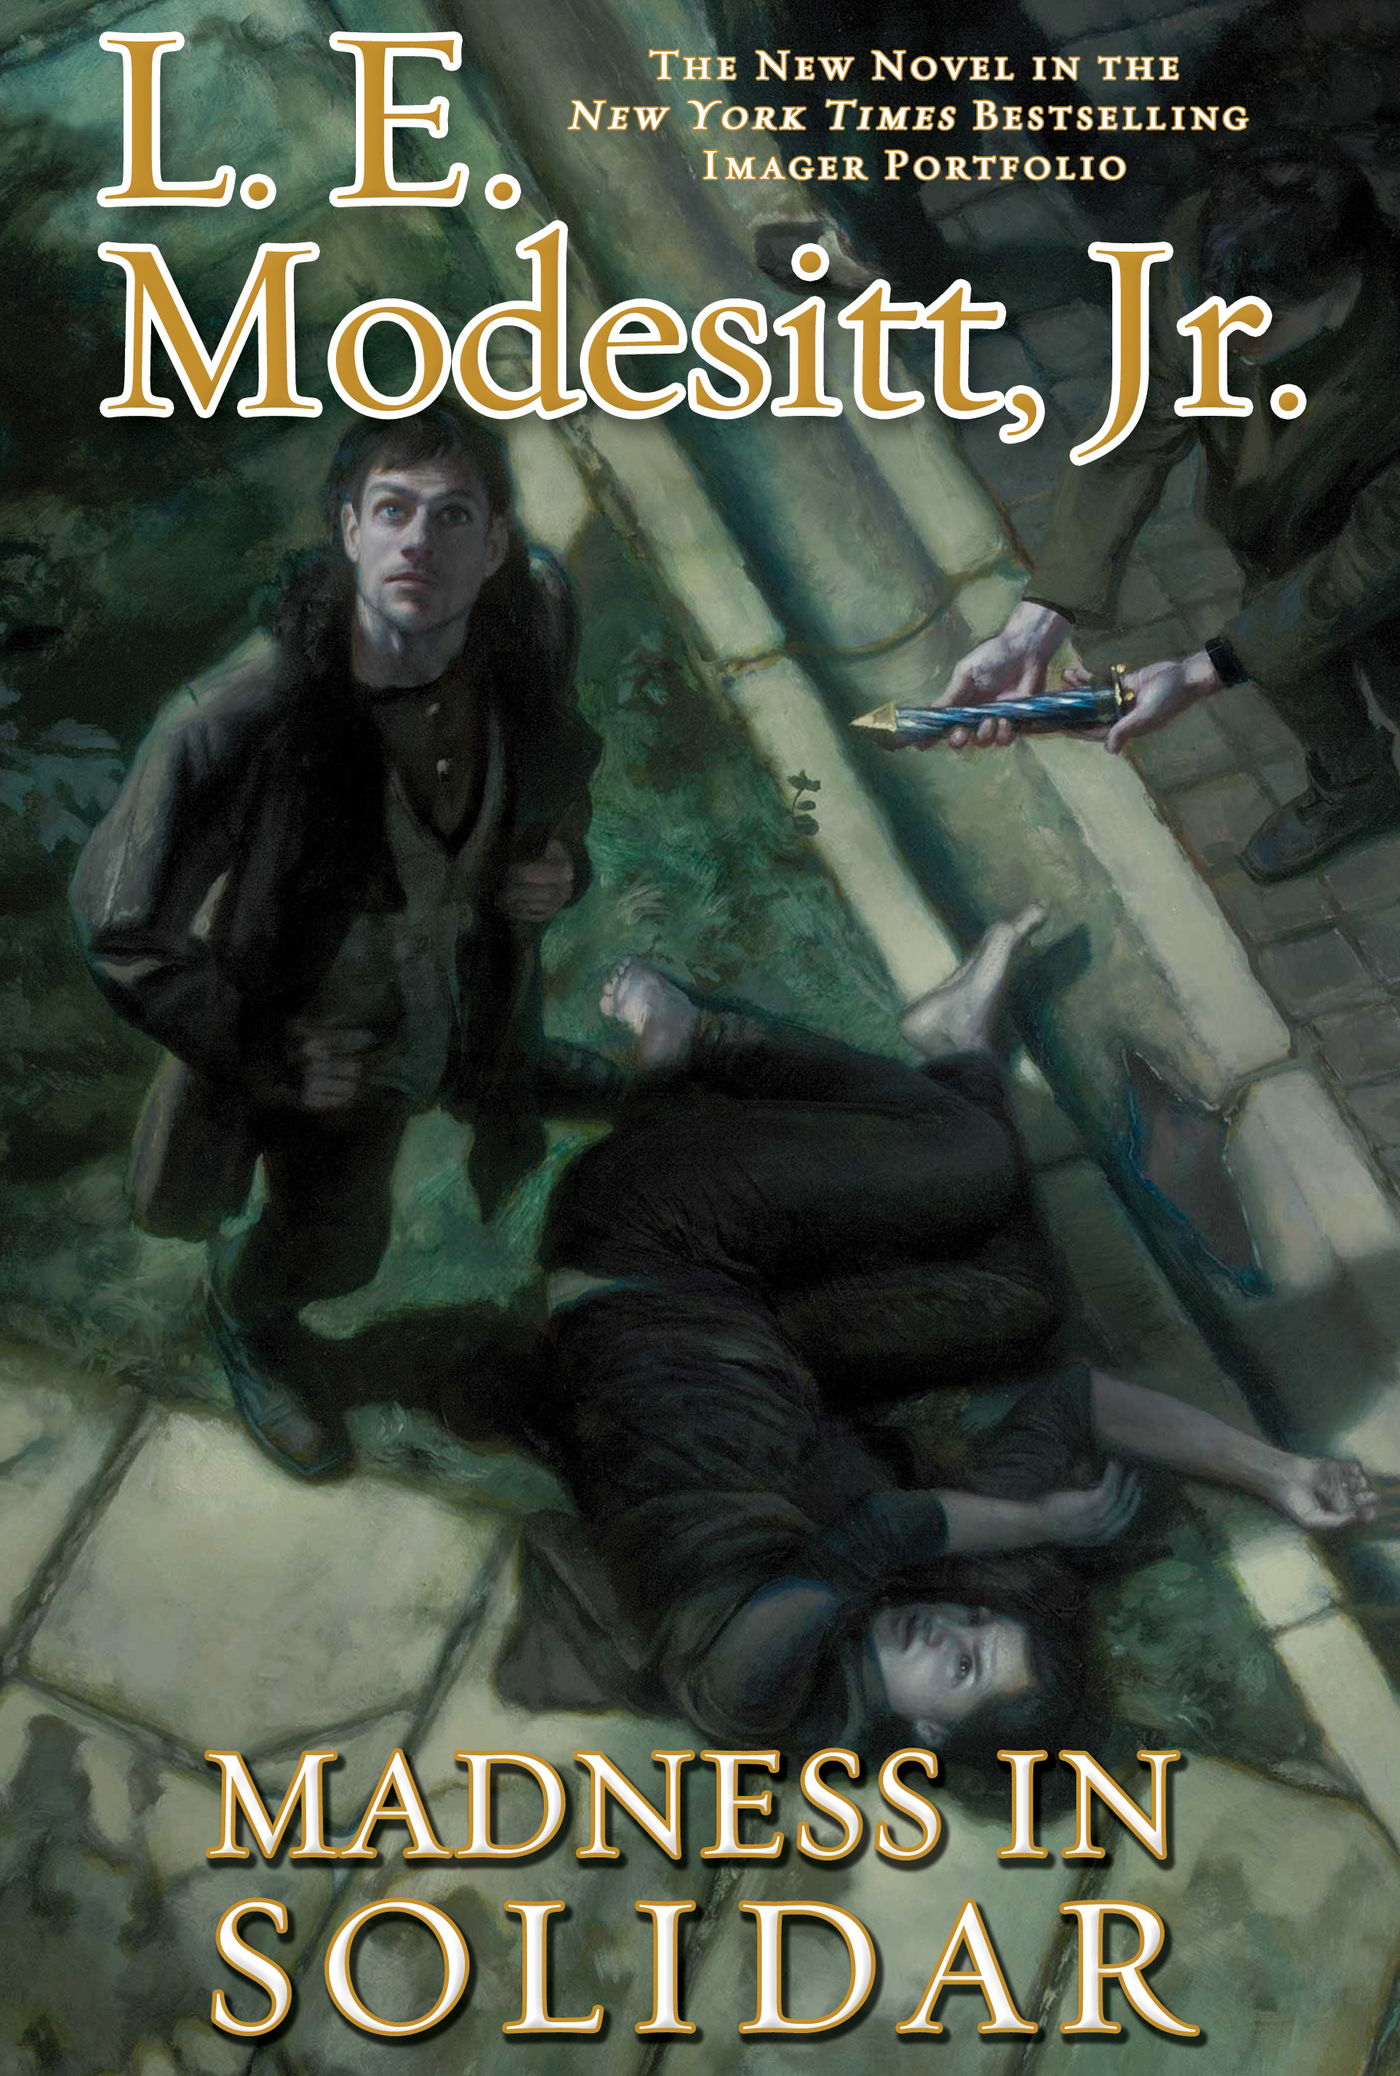 Madness in Solidar : The Ninth Novel in the Bestselling Imager Portfolio by L. E. Modesitt, Jr.